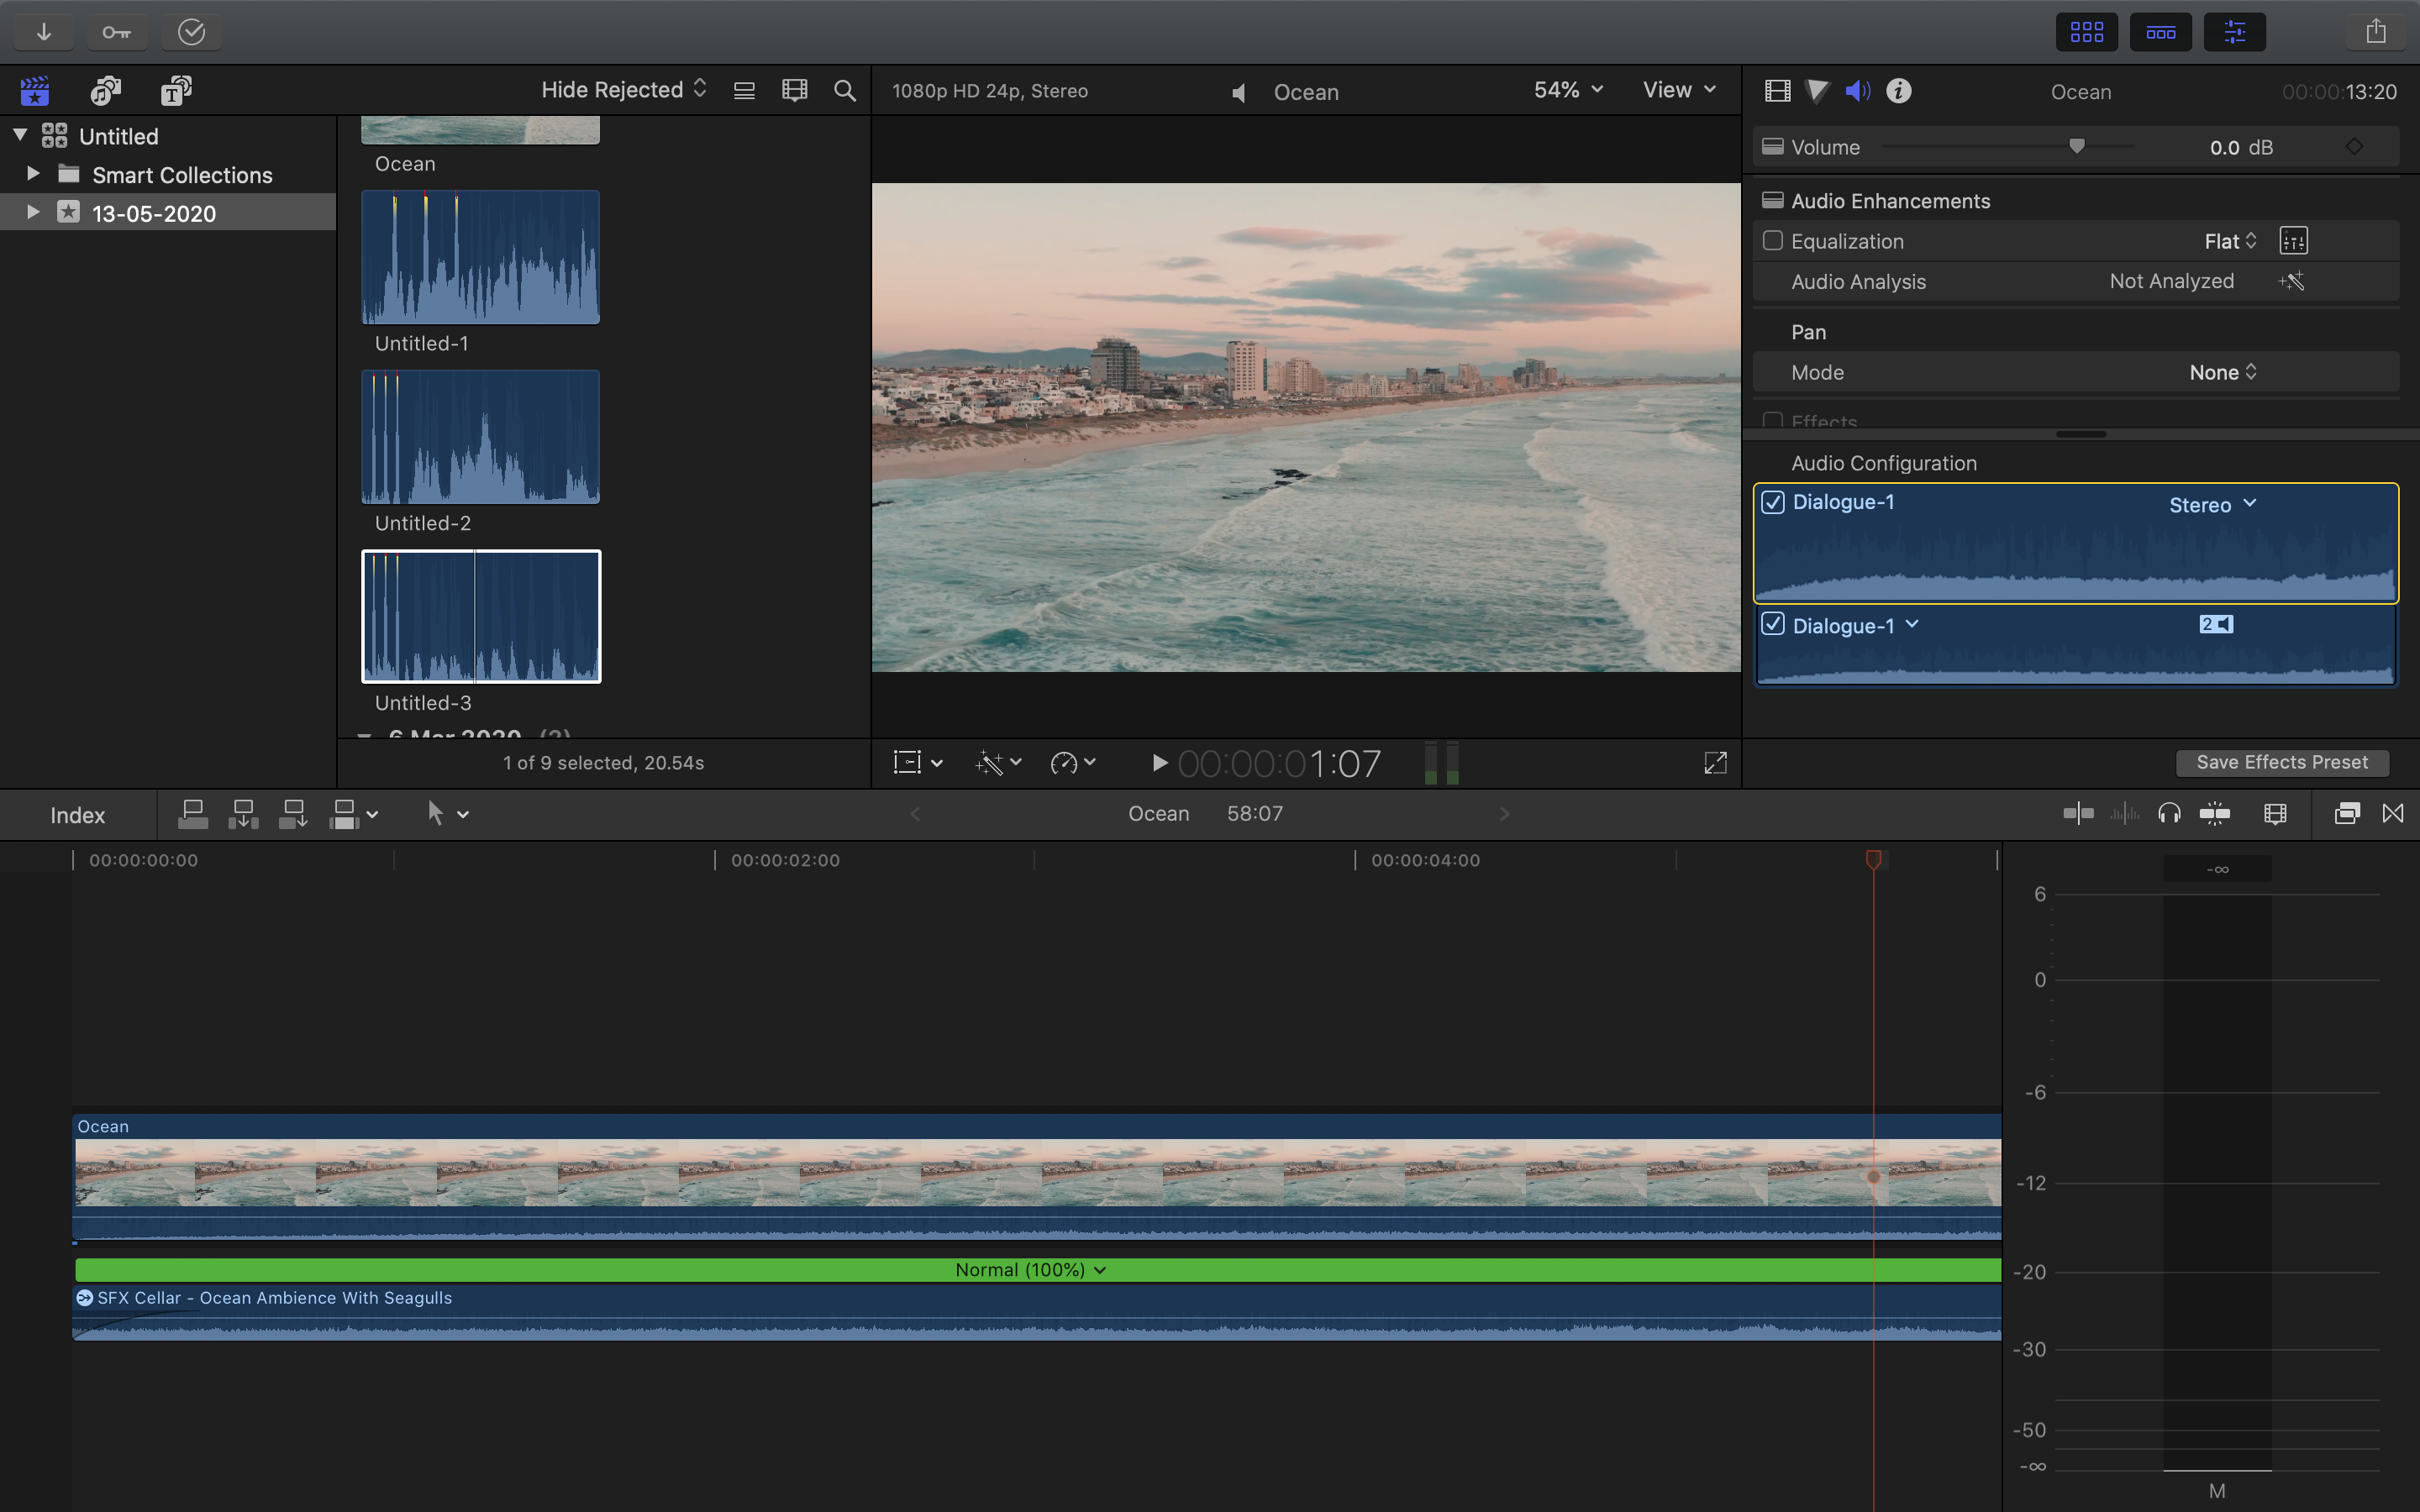 final cut pro x 10.3.4 timeline large space can